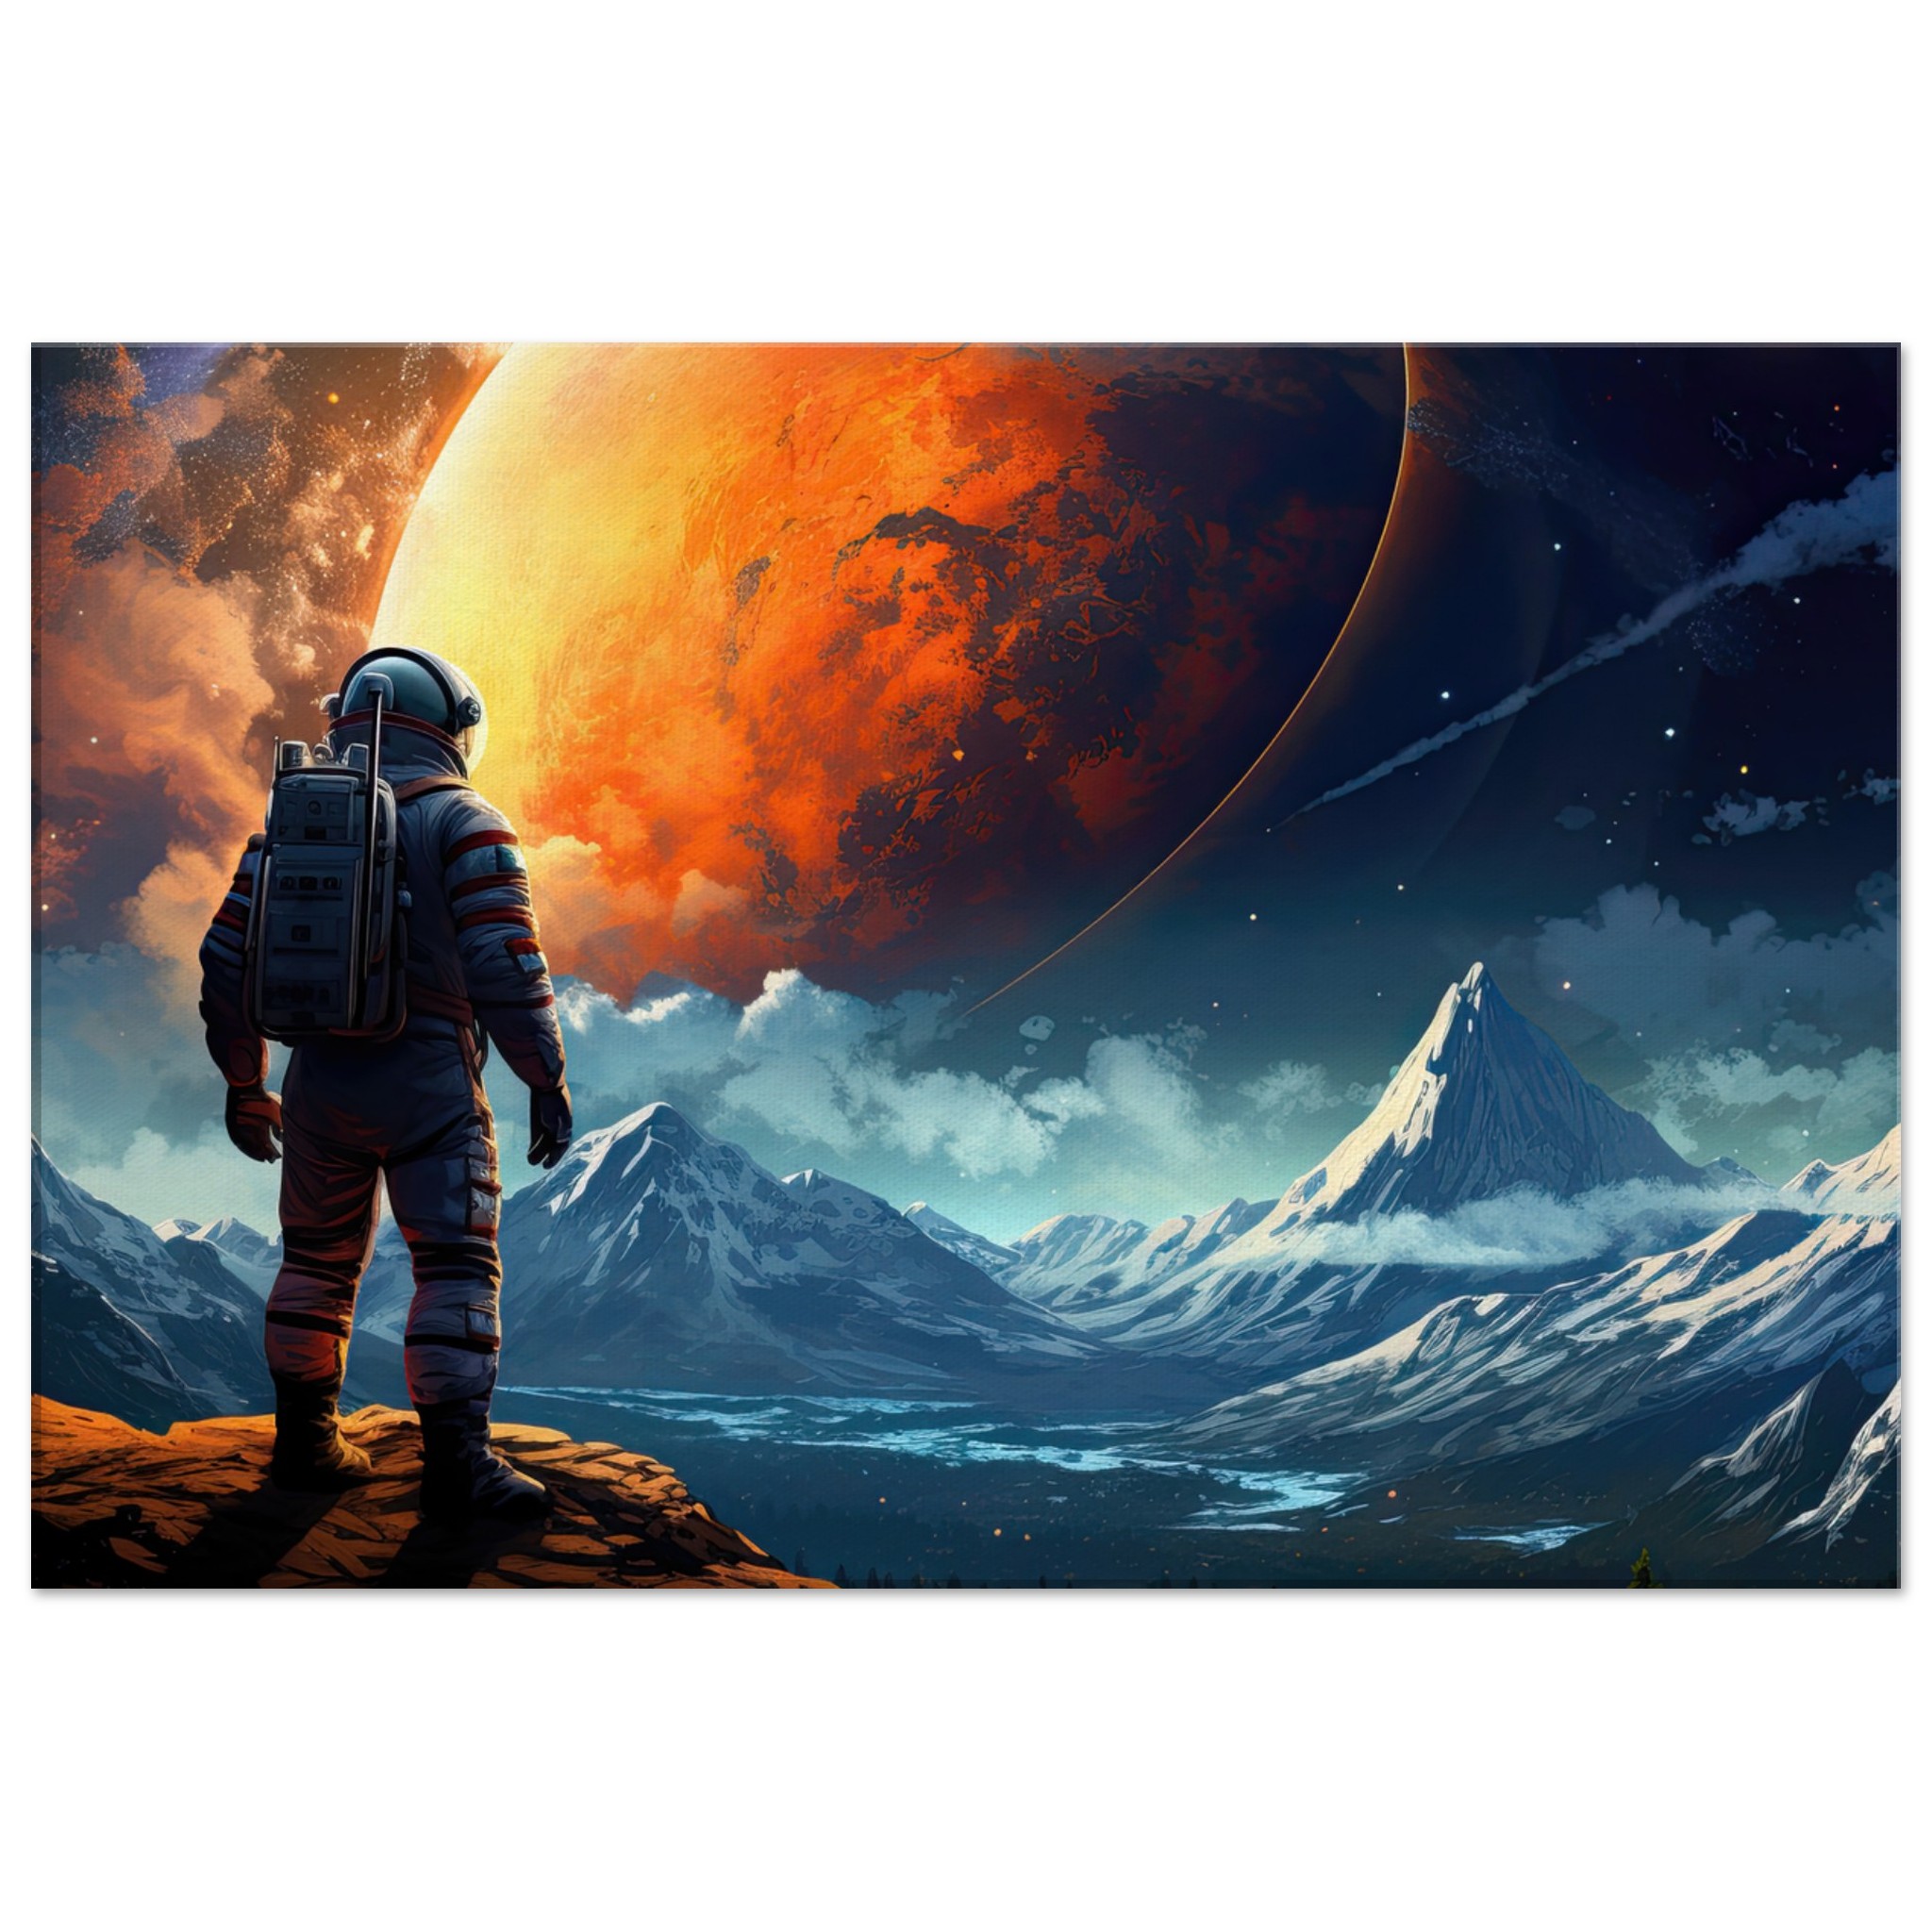 The Great Moon – Astronaut Canvas Print – 50×75 cm / 20×30″, Thick